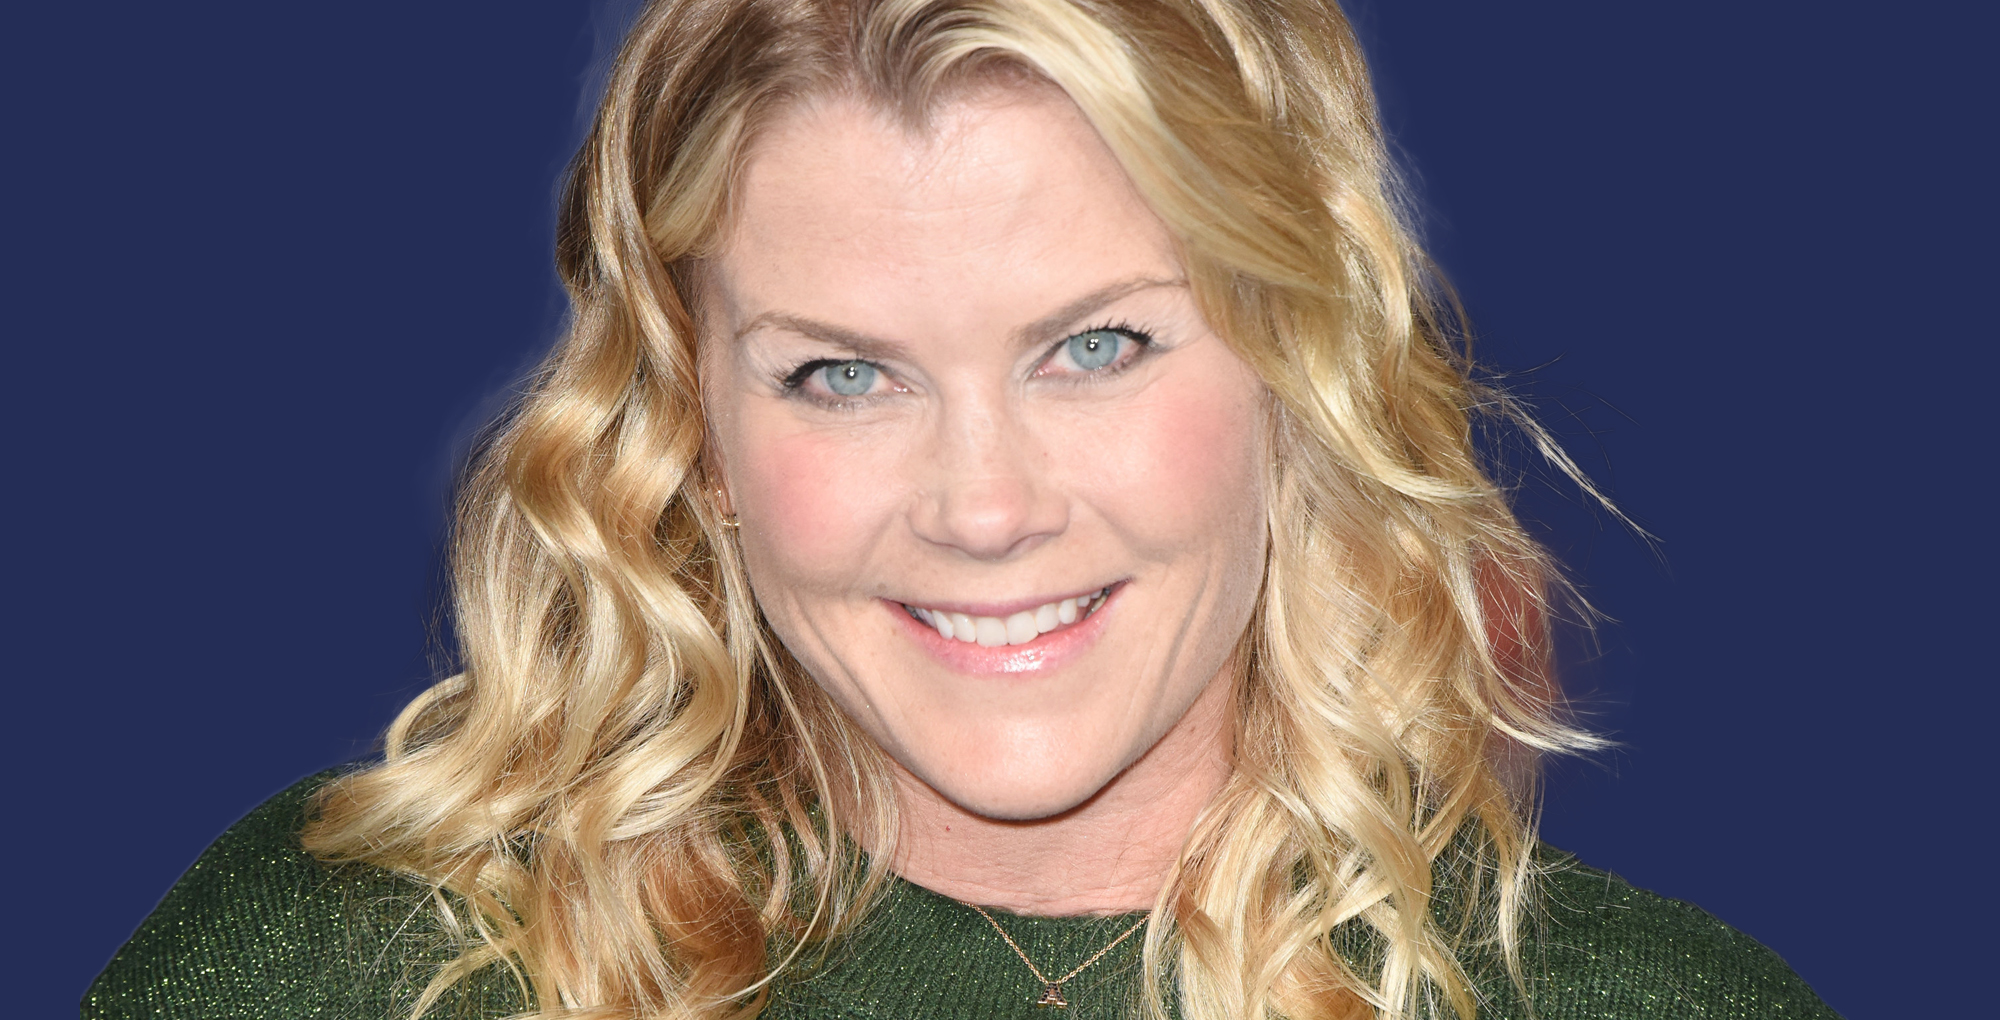 alison sweeney plays sami brady on days of our lives.